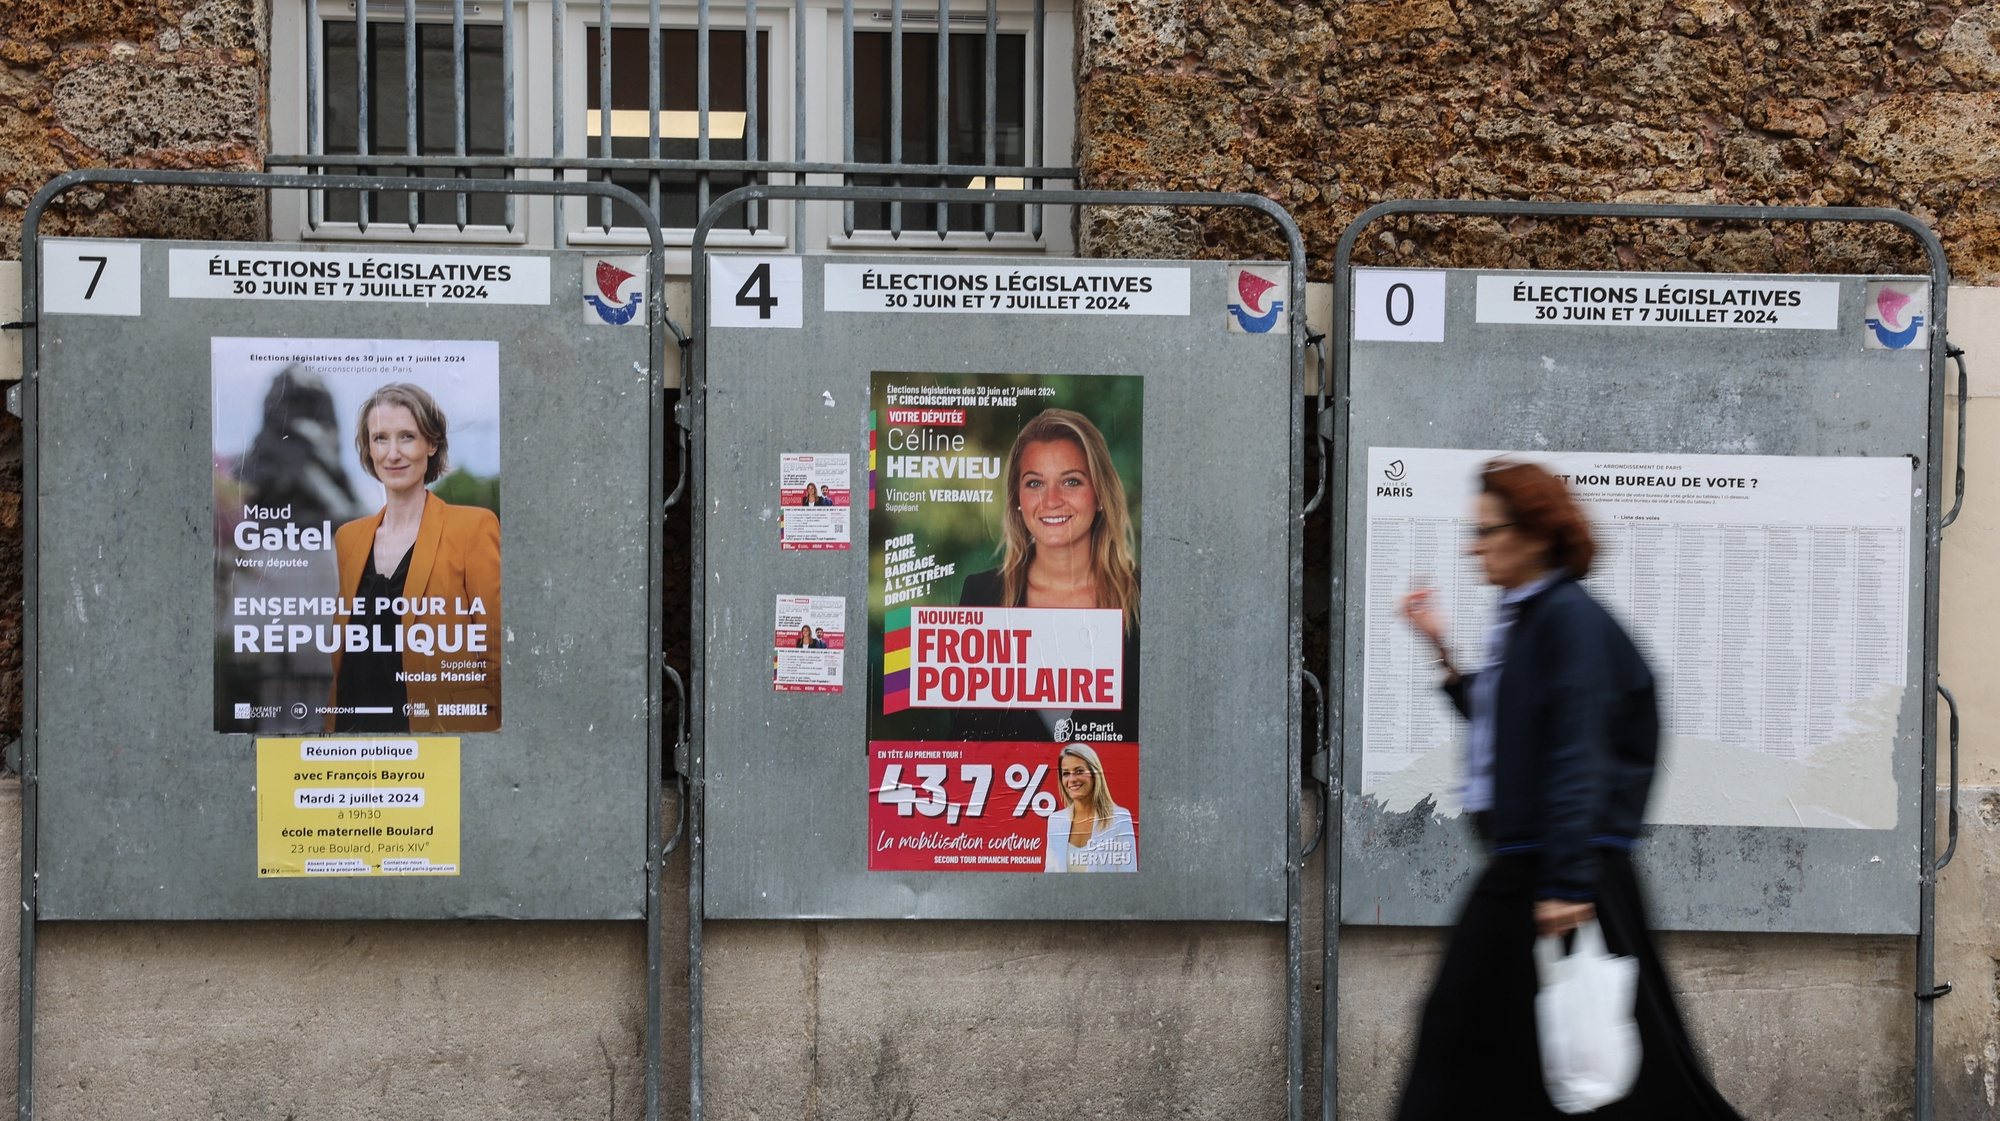 epa11456703 A woman walks past a poster for Nouveau Front Populaire &#039;The New Popular Front&#039;  candidates (C) for the parliamentary elections in Paris, France, 04 July 2024. The second round of the French parliamentary elections is to be held on 07 July 2024.  EPA/MOHAMMED BADRA